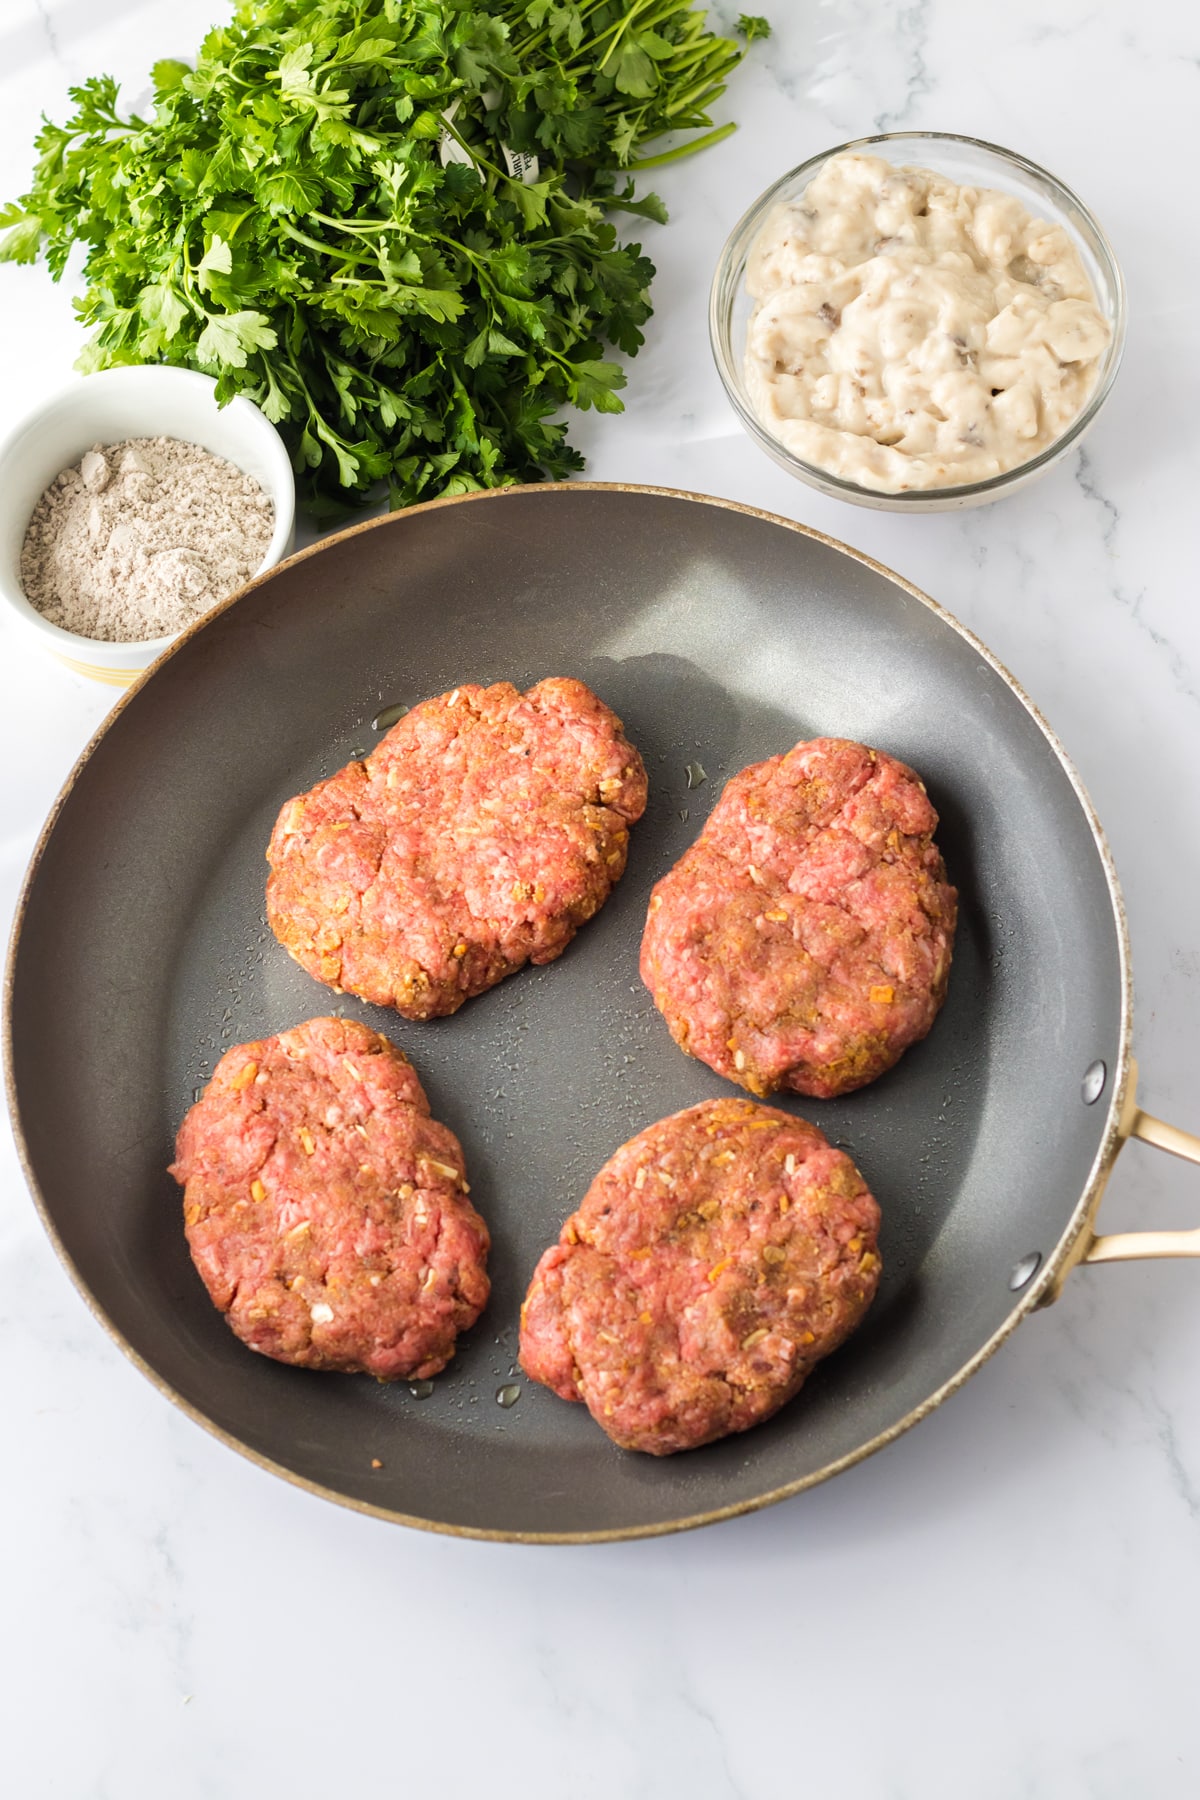 Next step in Slow Cooker Smothered Hamburgers is to shape the patties and put them over a pan.